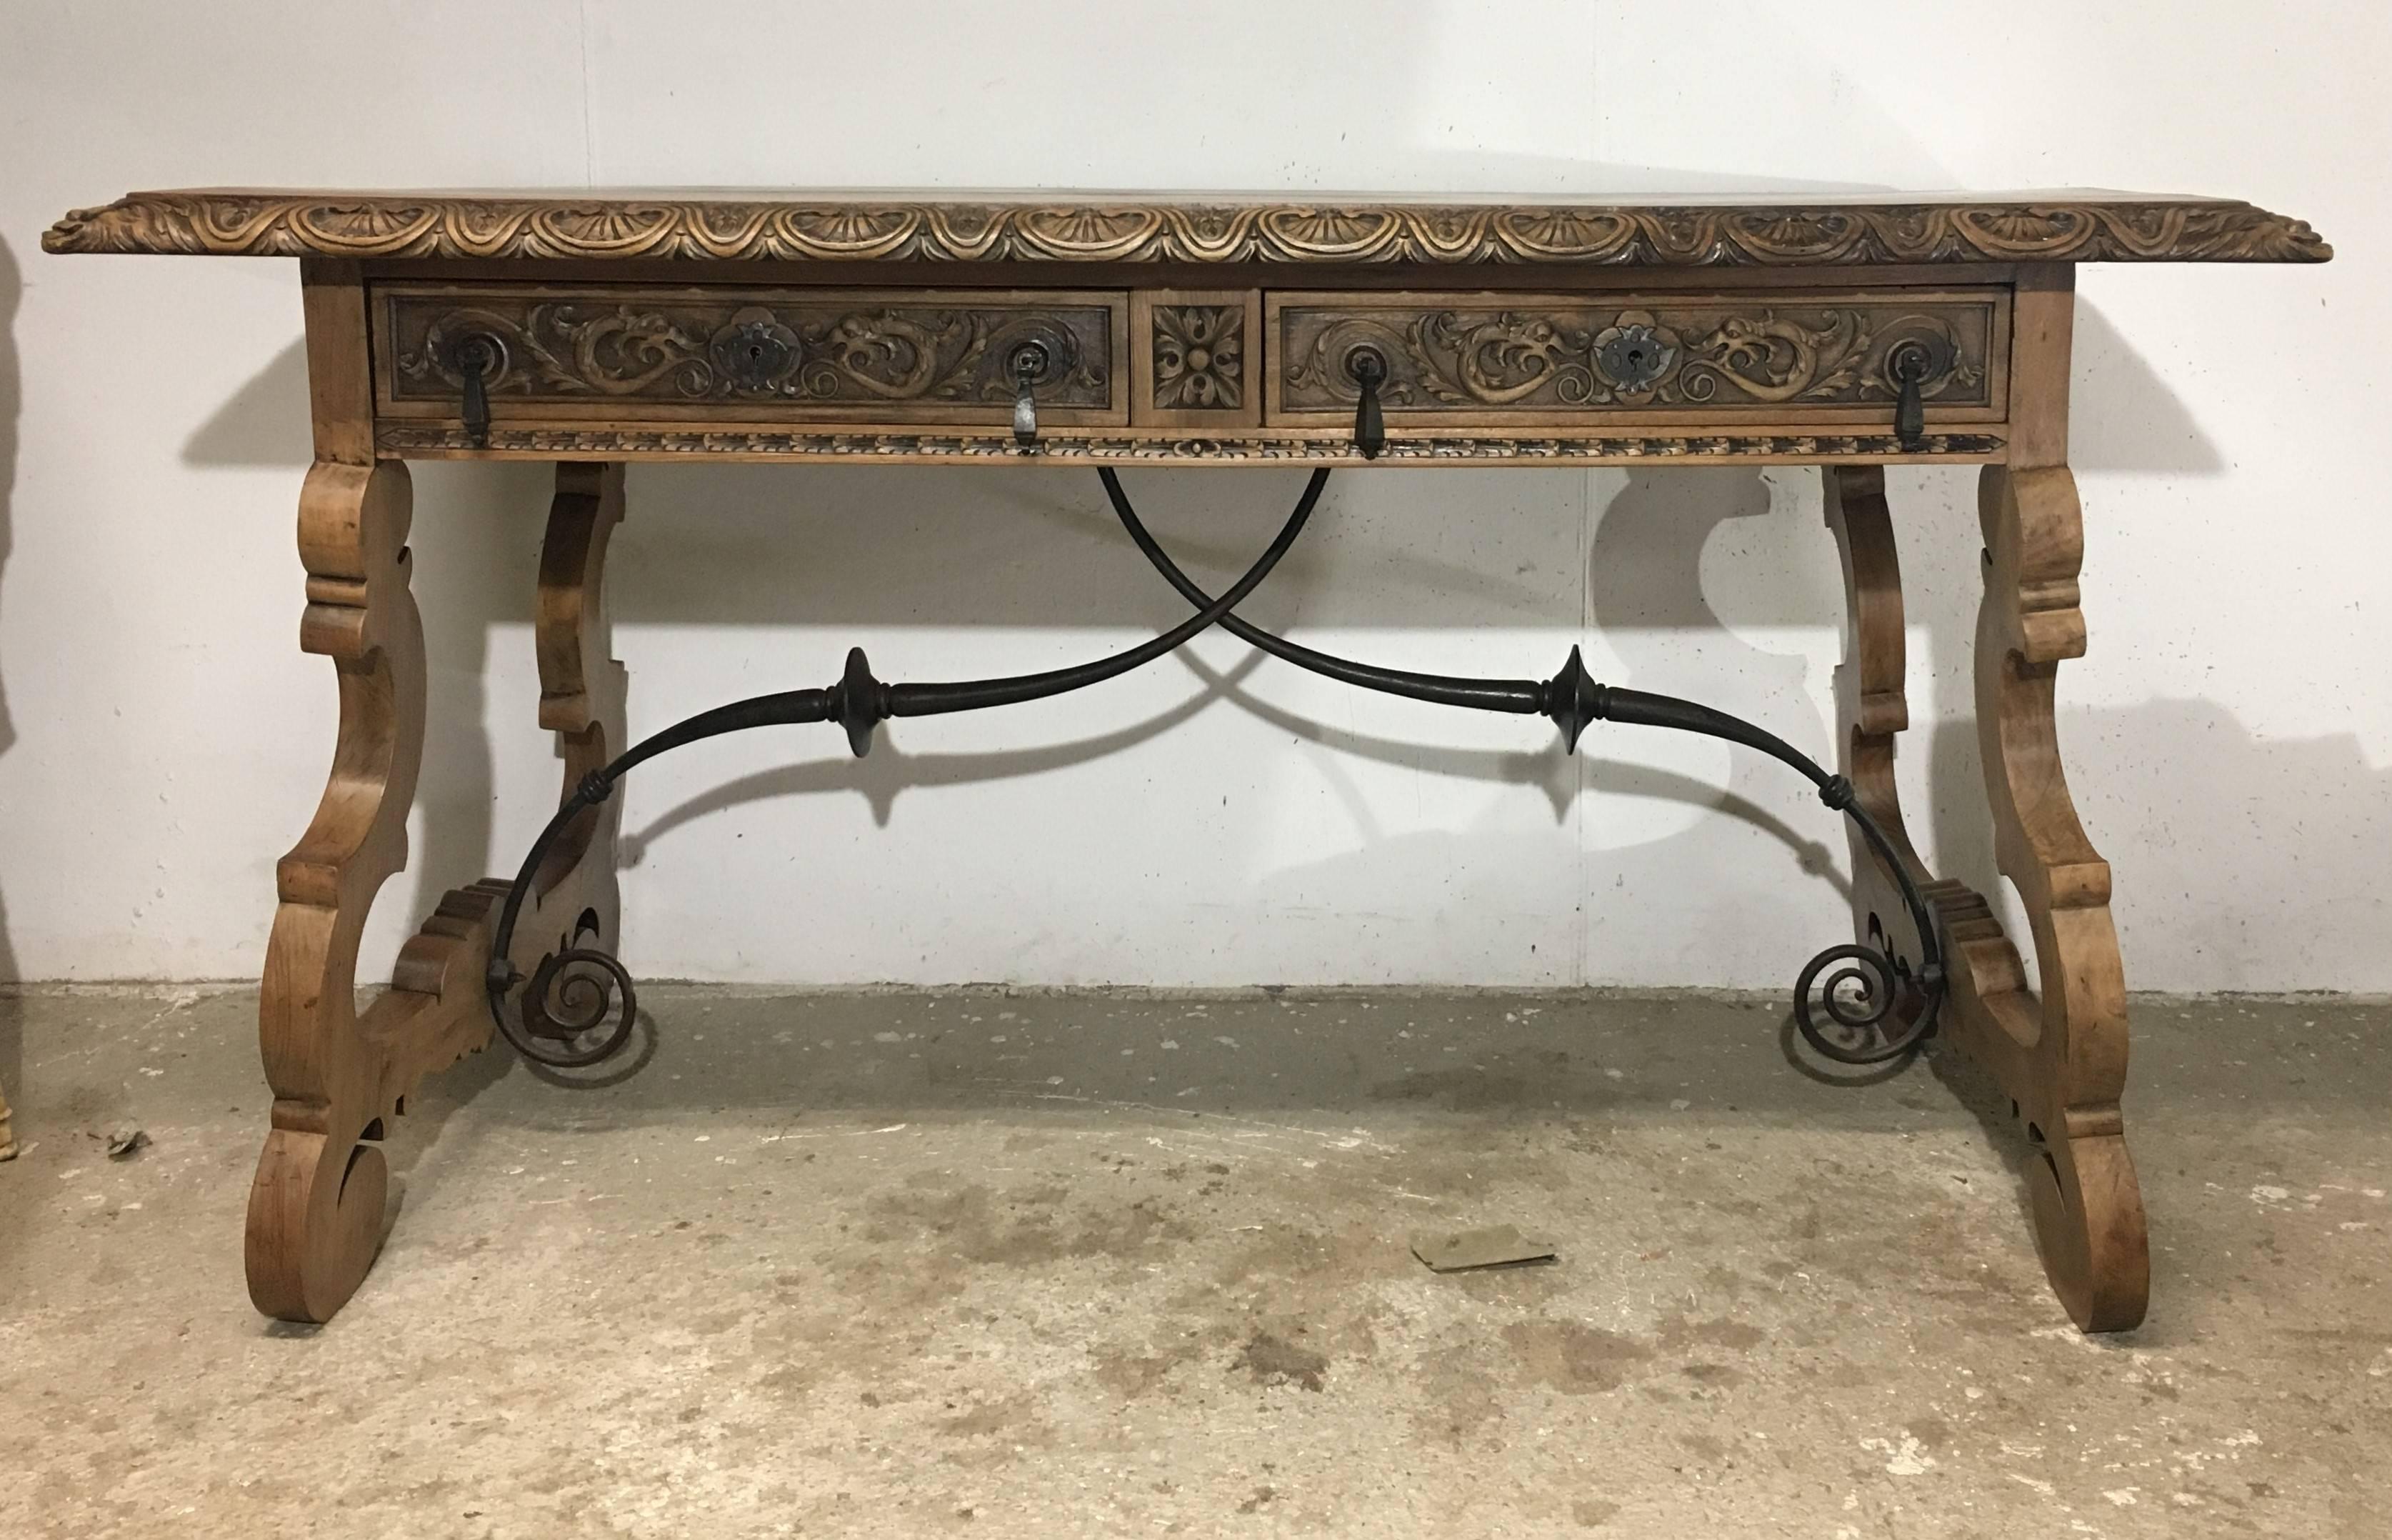 Spectacular 19th century walnut and wrought iron desk with two drawers. Beautiful unique brass metalwork on both drawers. A Brutalist wrought iron stretcher connects two pedestals lyre legs a hand-wrought iron.
All the four sides are carved, it´s